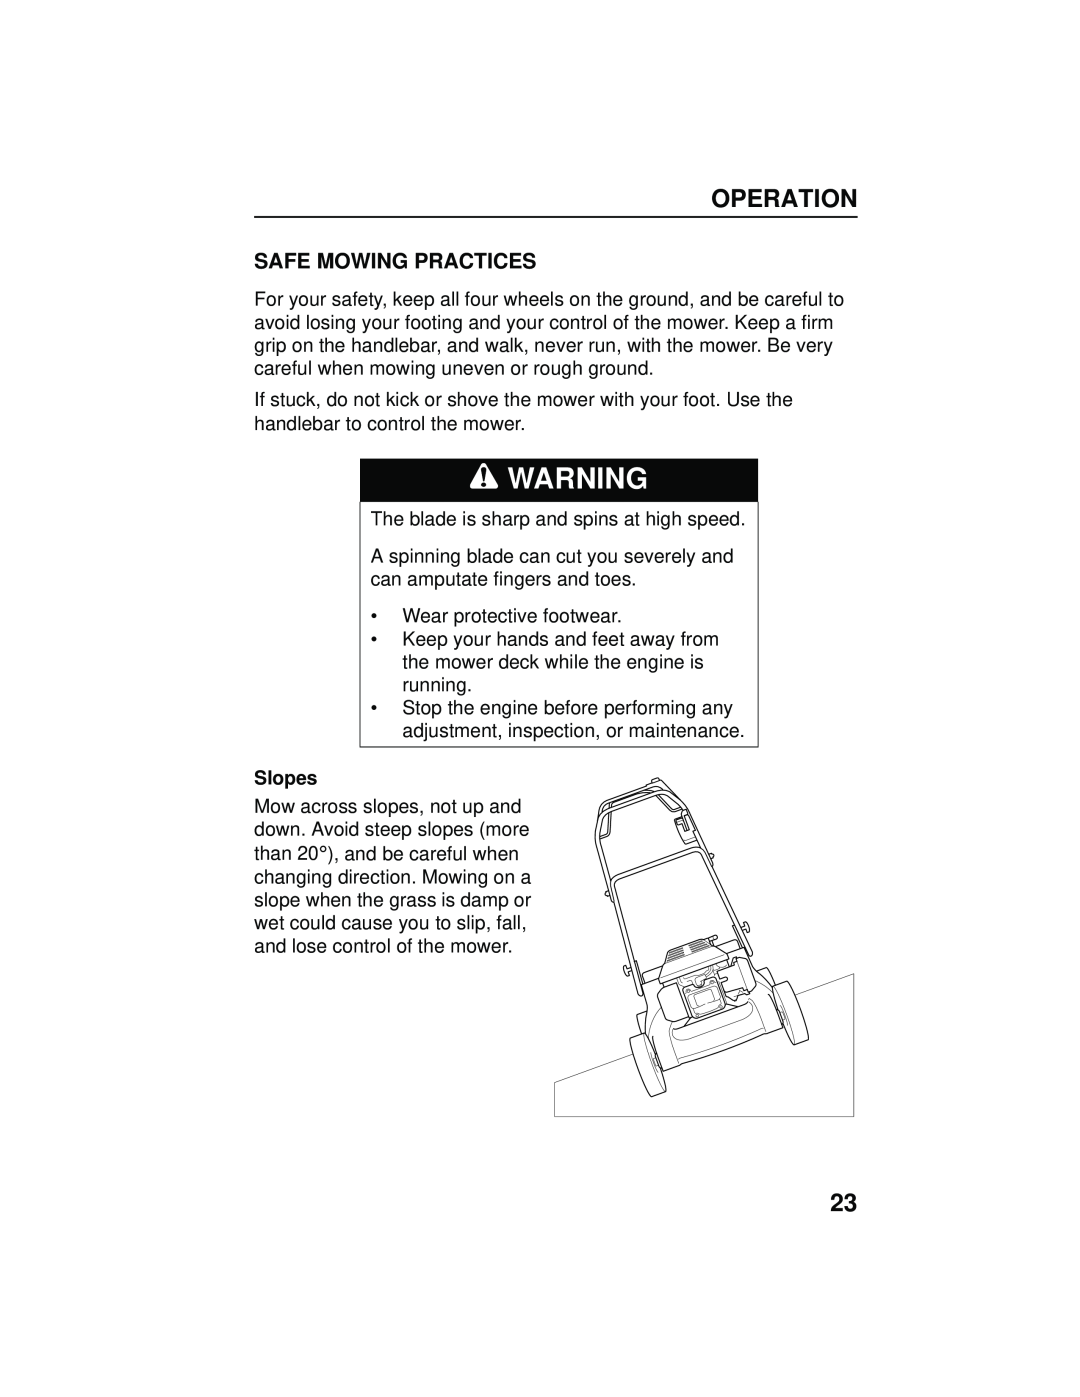 Honda Power Equipment HRB216TXA owner manual Safe Mowing Practices, Slopes, Operation 